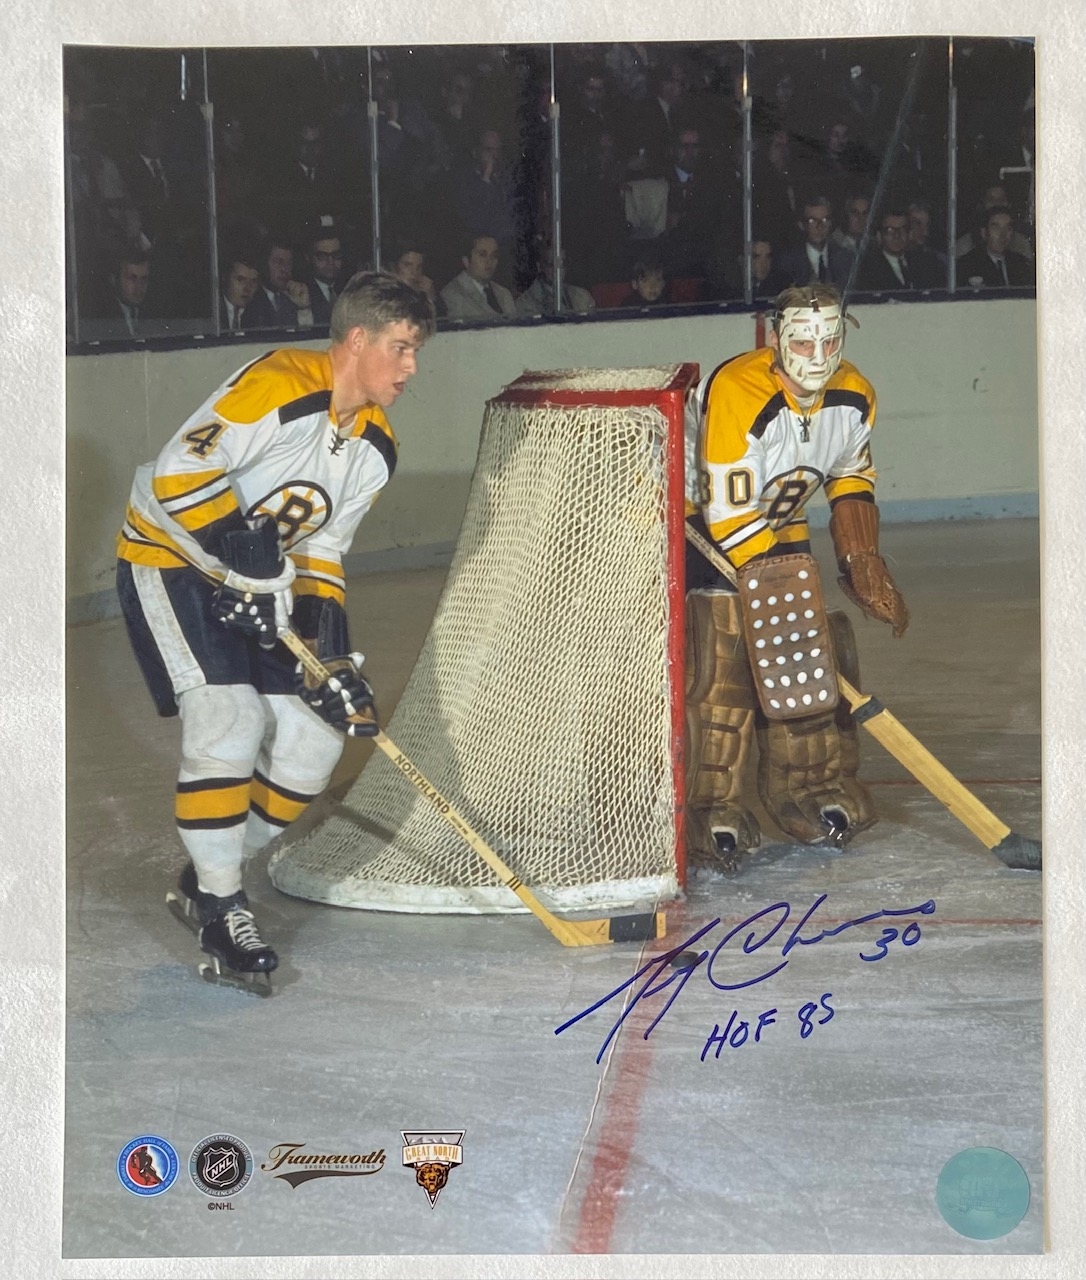 Gerry Cheevers Boston Bruins Signed 8x10 Photo with Bobby Orr Pictured (Flawed)